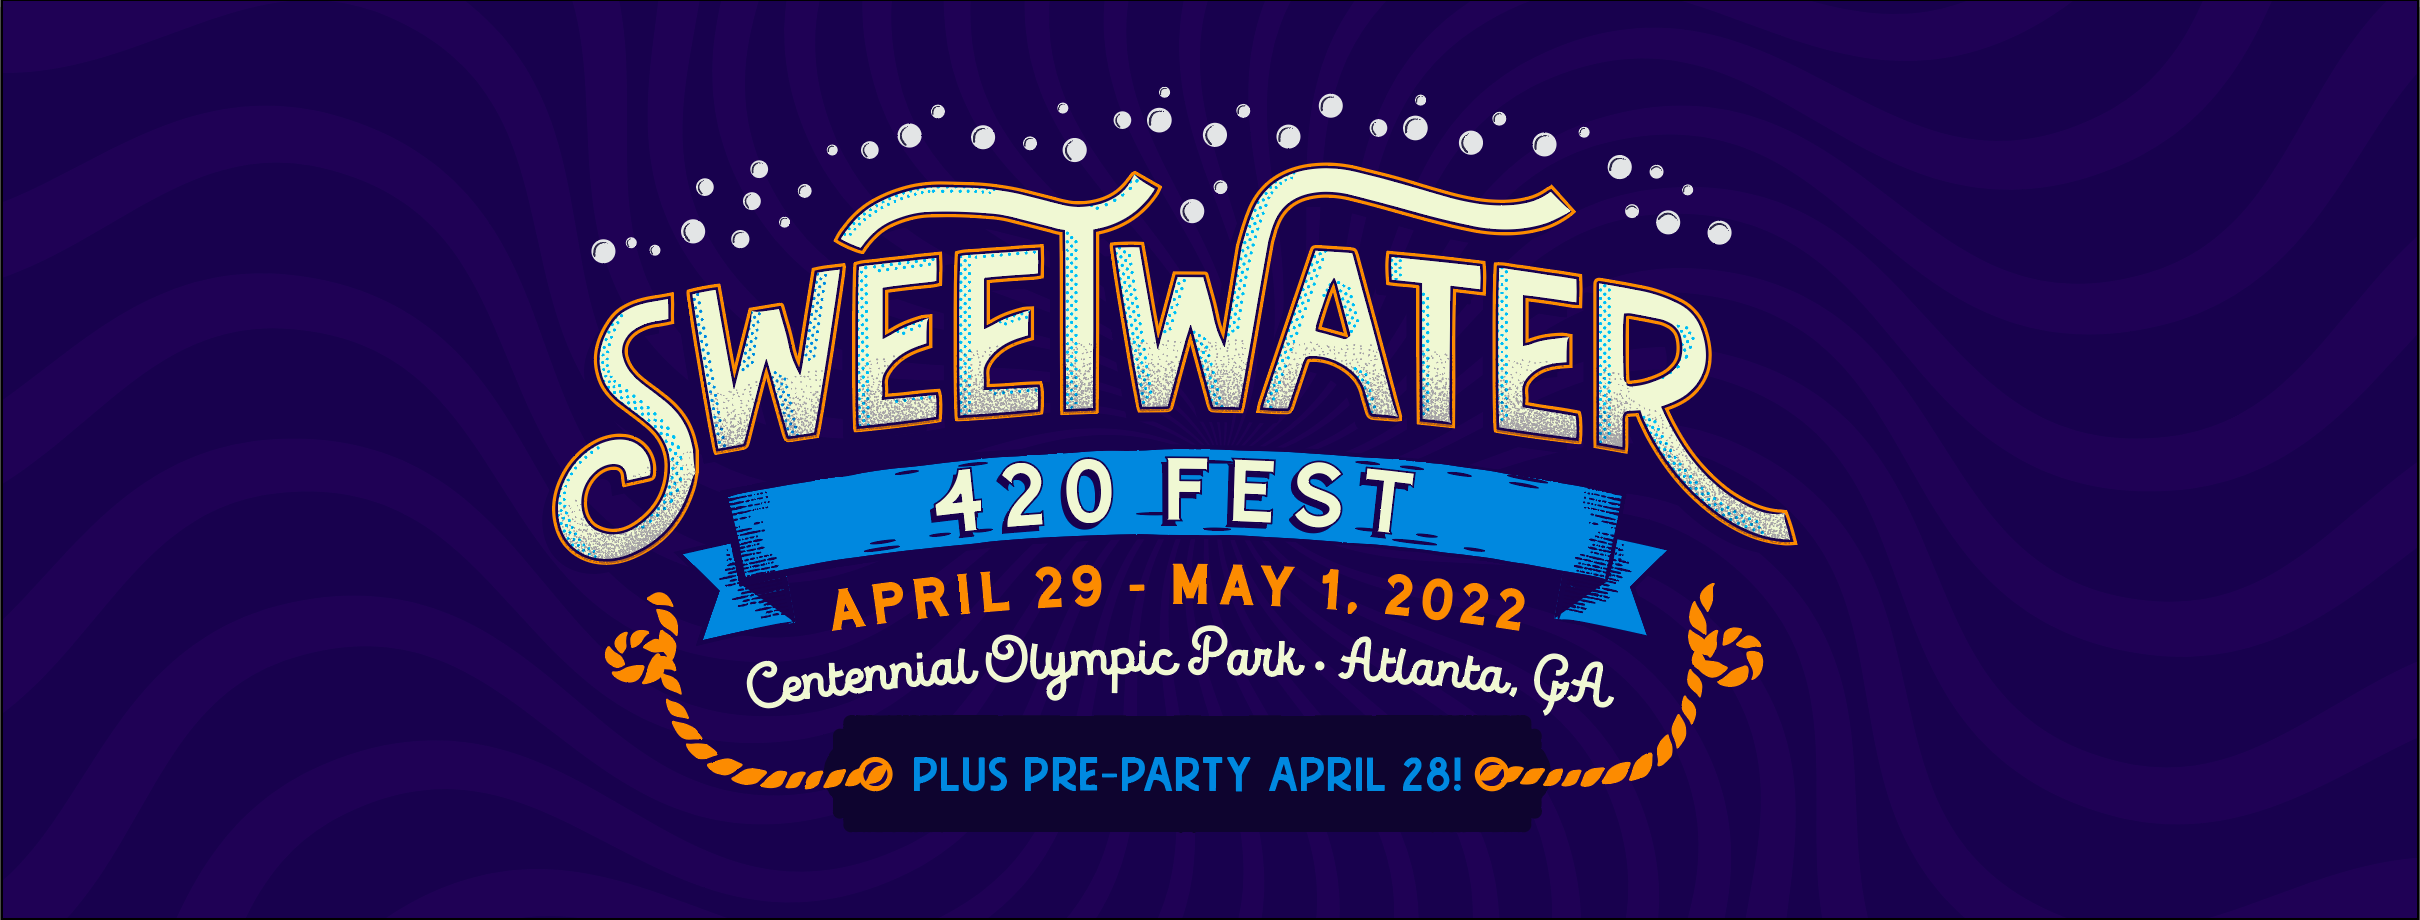 Oysterhead, Trey Anastasio Band, The String Cheese Incident, Snoop Dogg and More to Play 2022 SweetWater 420 Fest